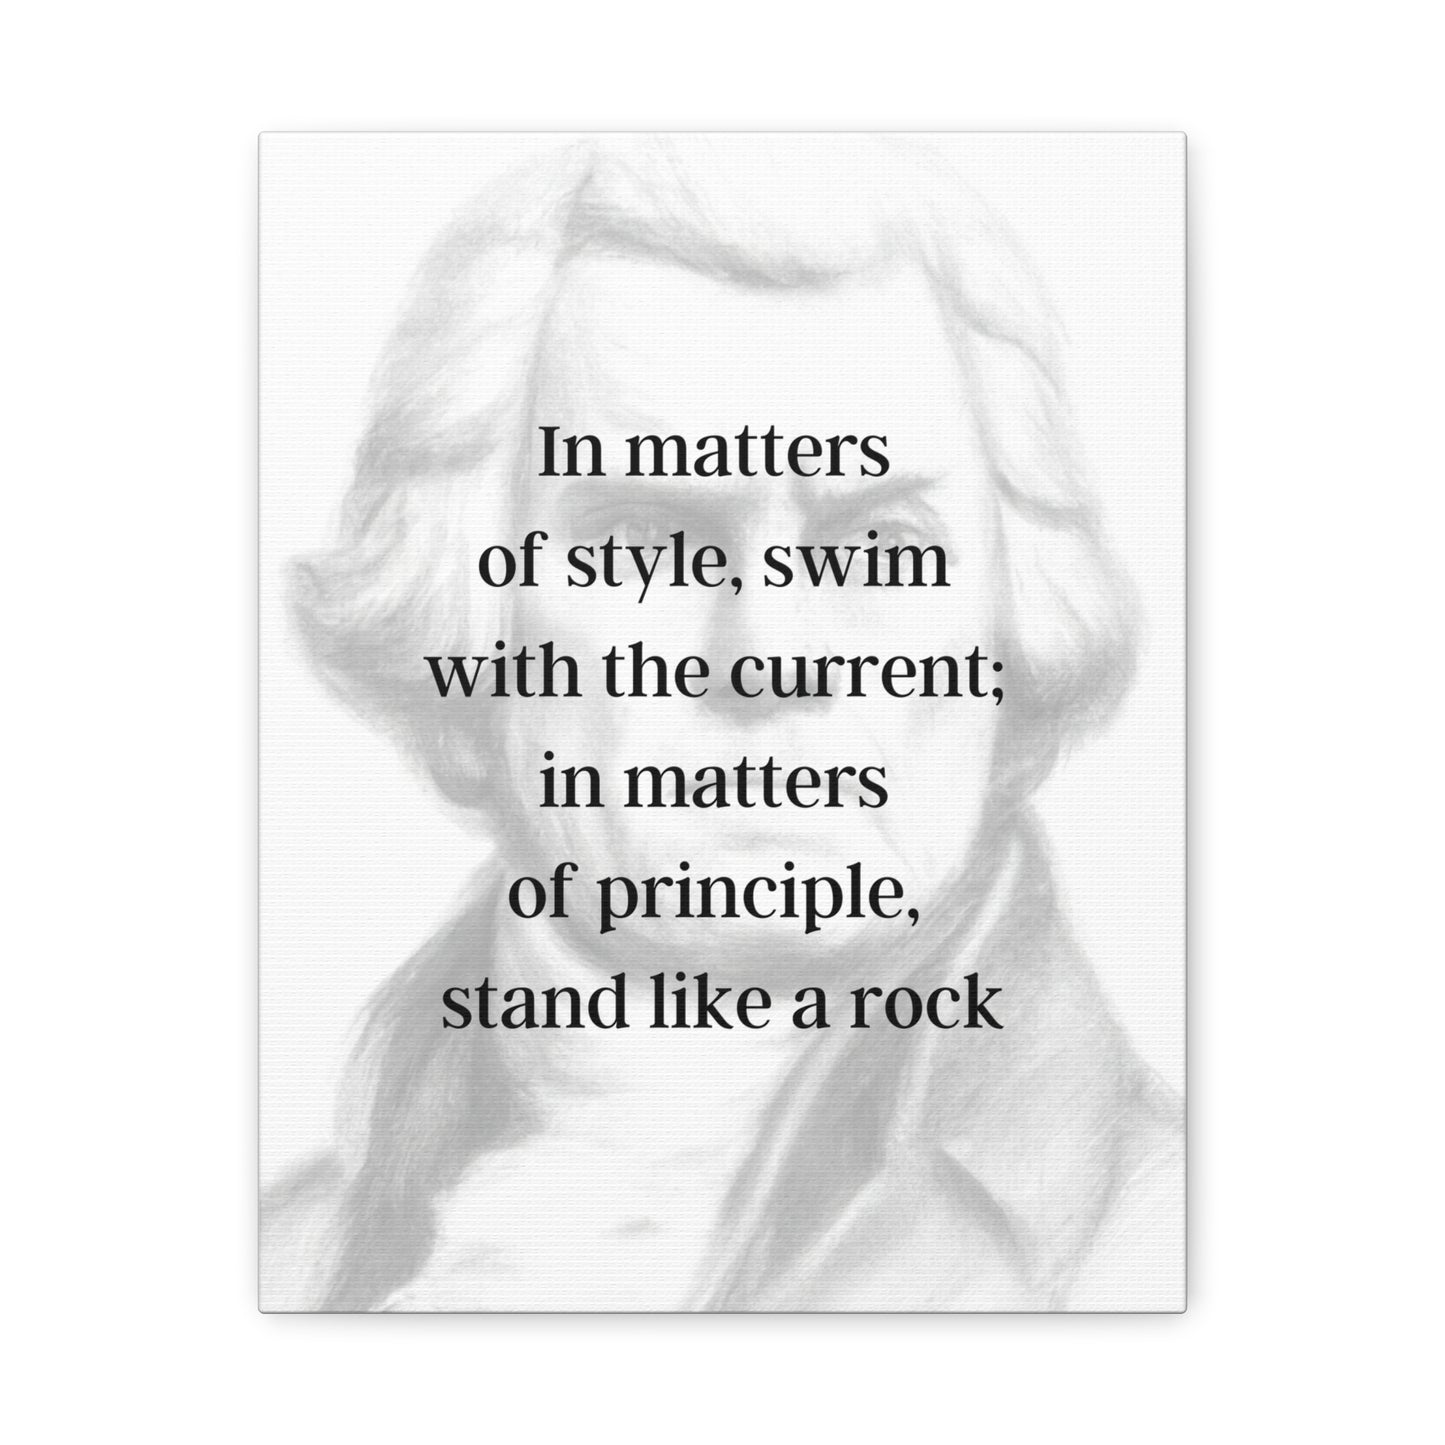 Thomas Jefferson Quote 2, Canvas Art, Light Print, 3rd President of the United States, American Patriots, AI Art, Political Art, Canvas Prints, Presidential Portraits, Presidential Quotes, Inspirational Quotes